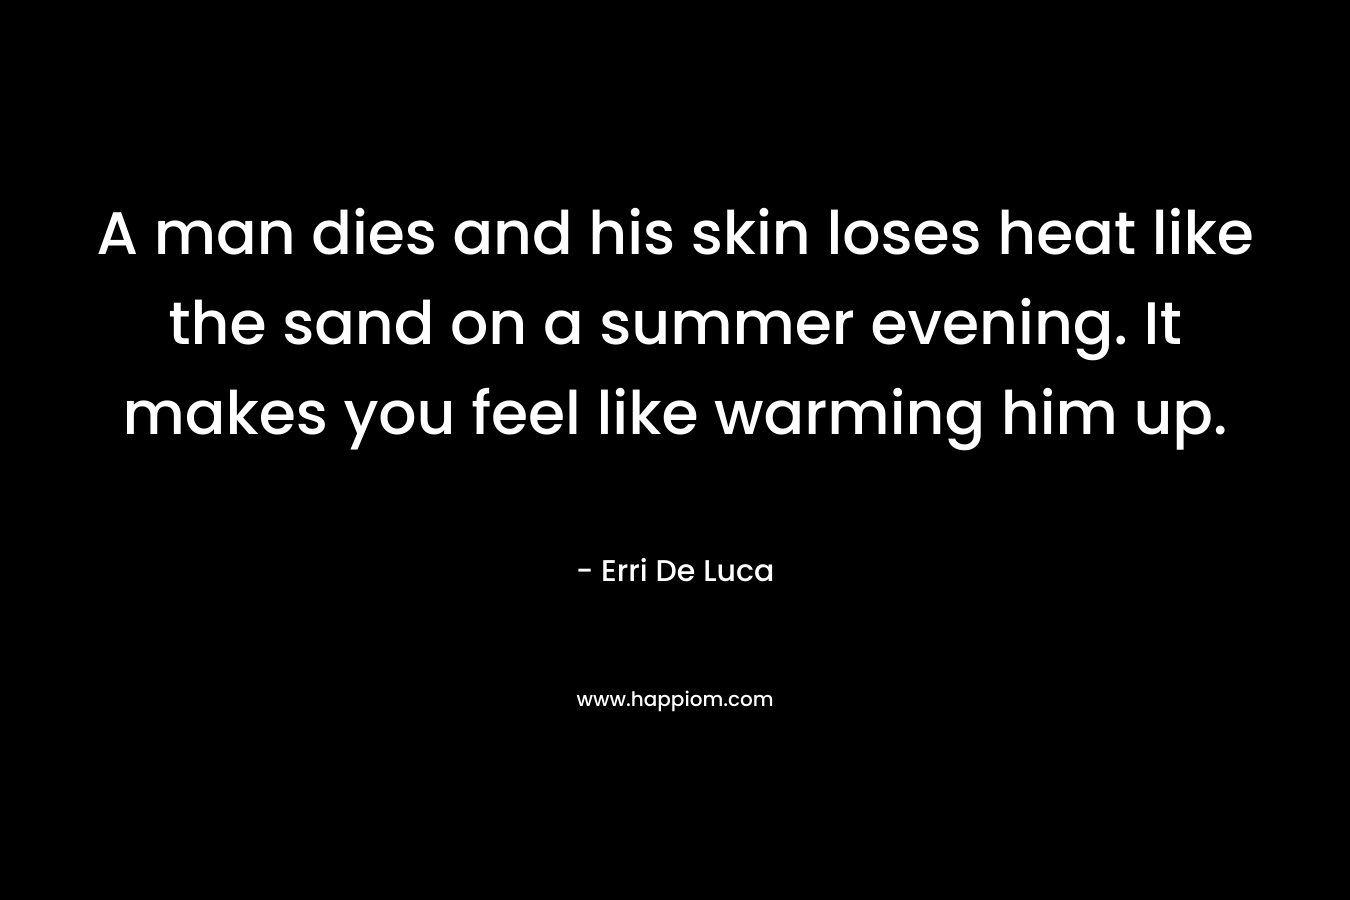 A man dies and his skin loses heat like the sand on a summer evening. It makes you feel like warming him up.